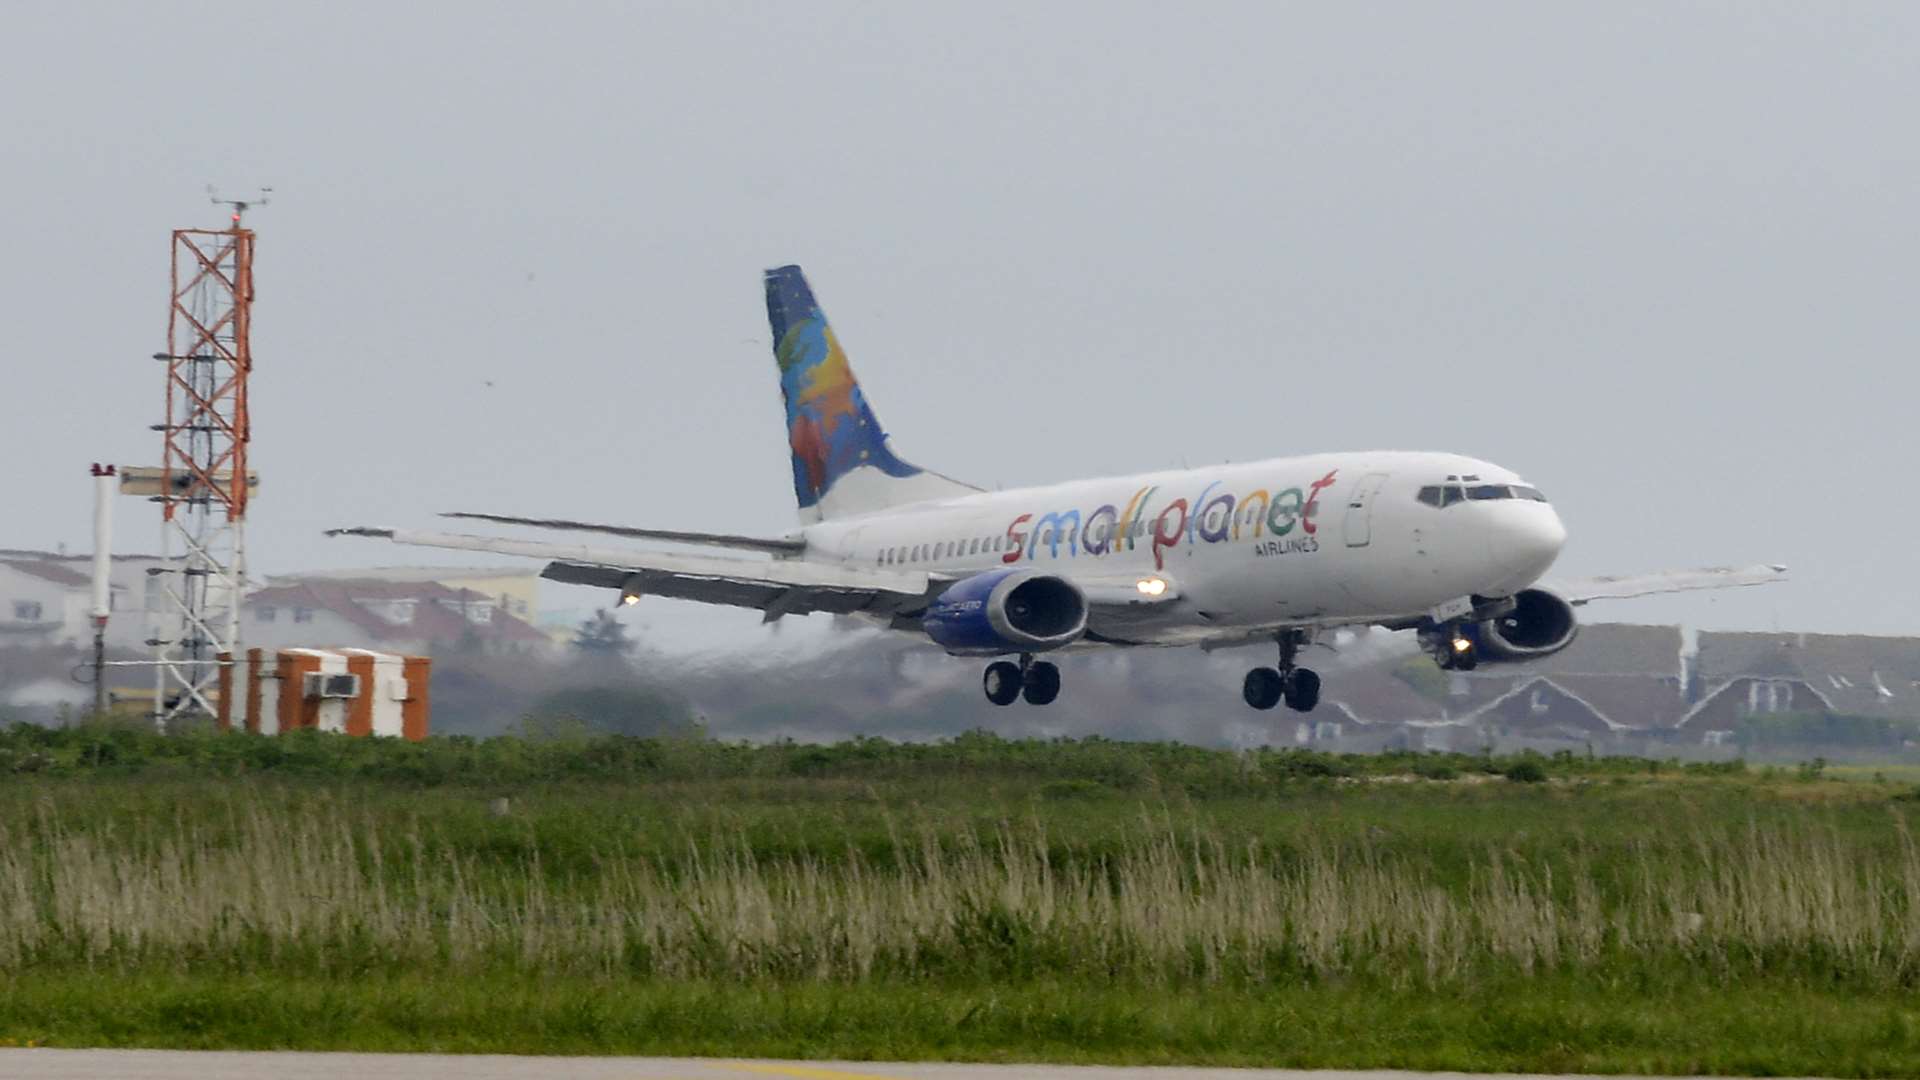 The first passenger airliner touches touches down at Lydd in June 2014